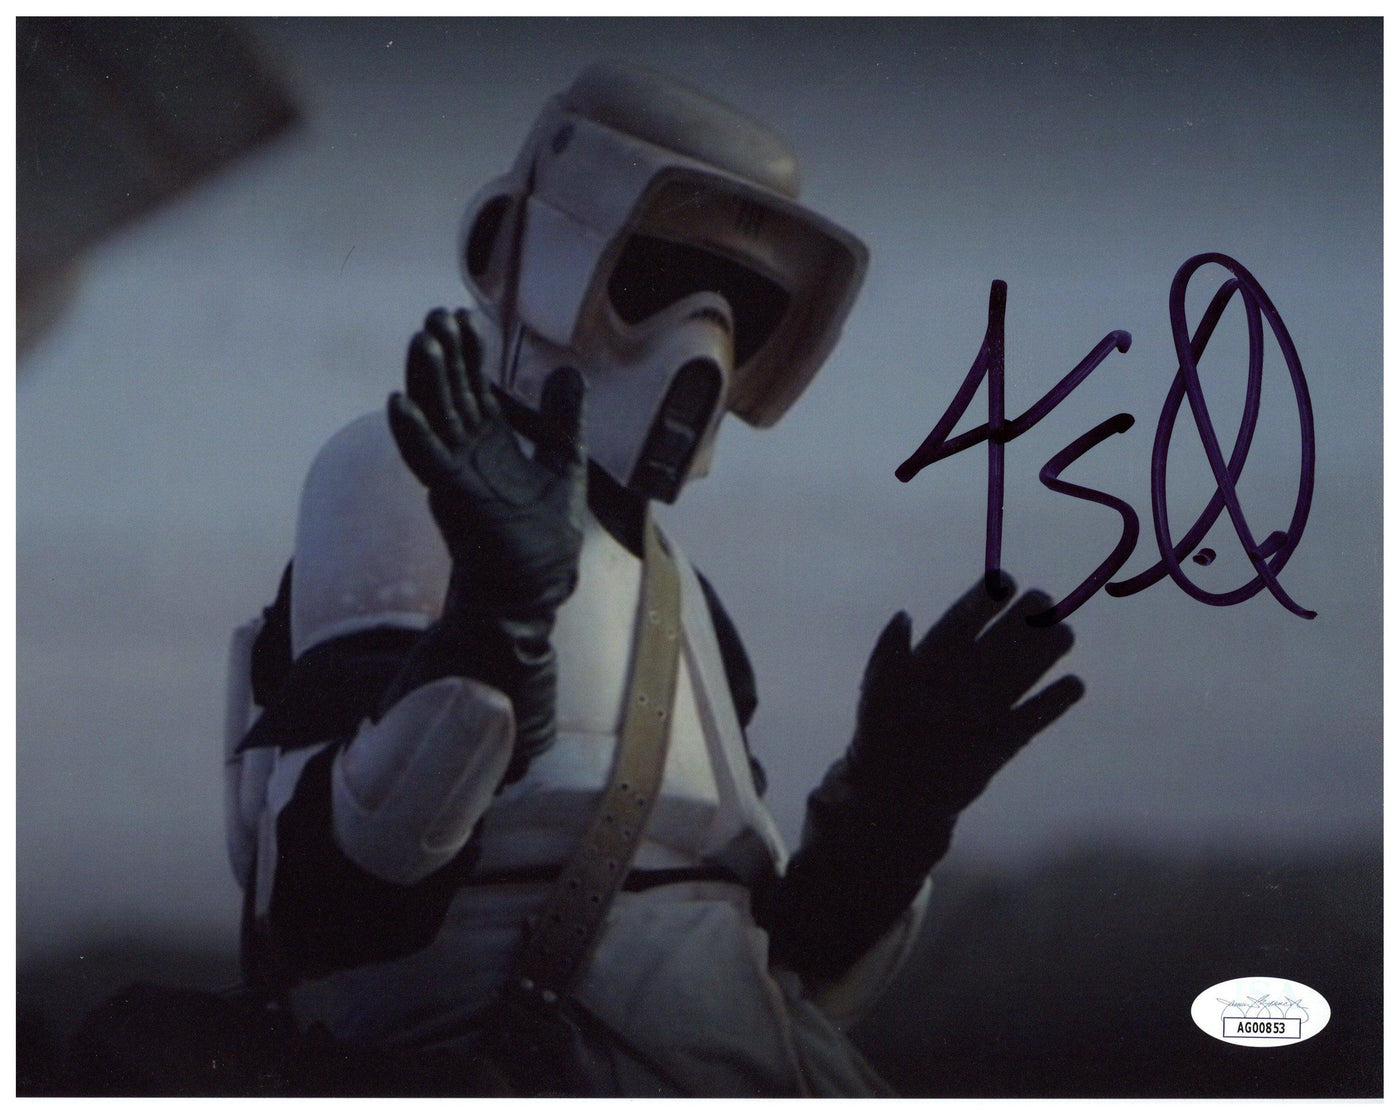 Jason Sudeikis Signed 8x10 Photo Star Wars Scout Trooper The Child Autographed JSA